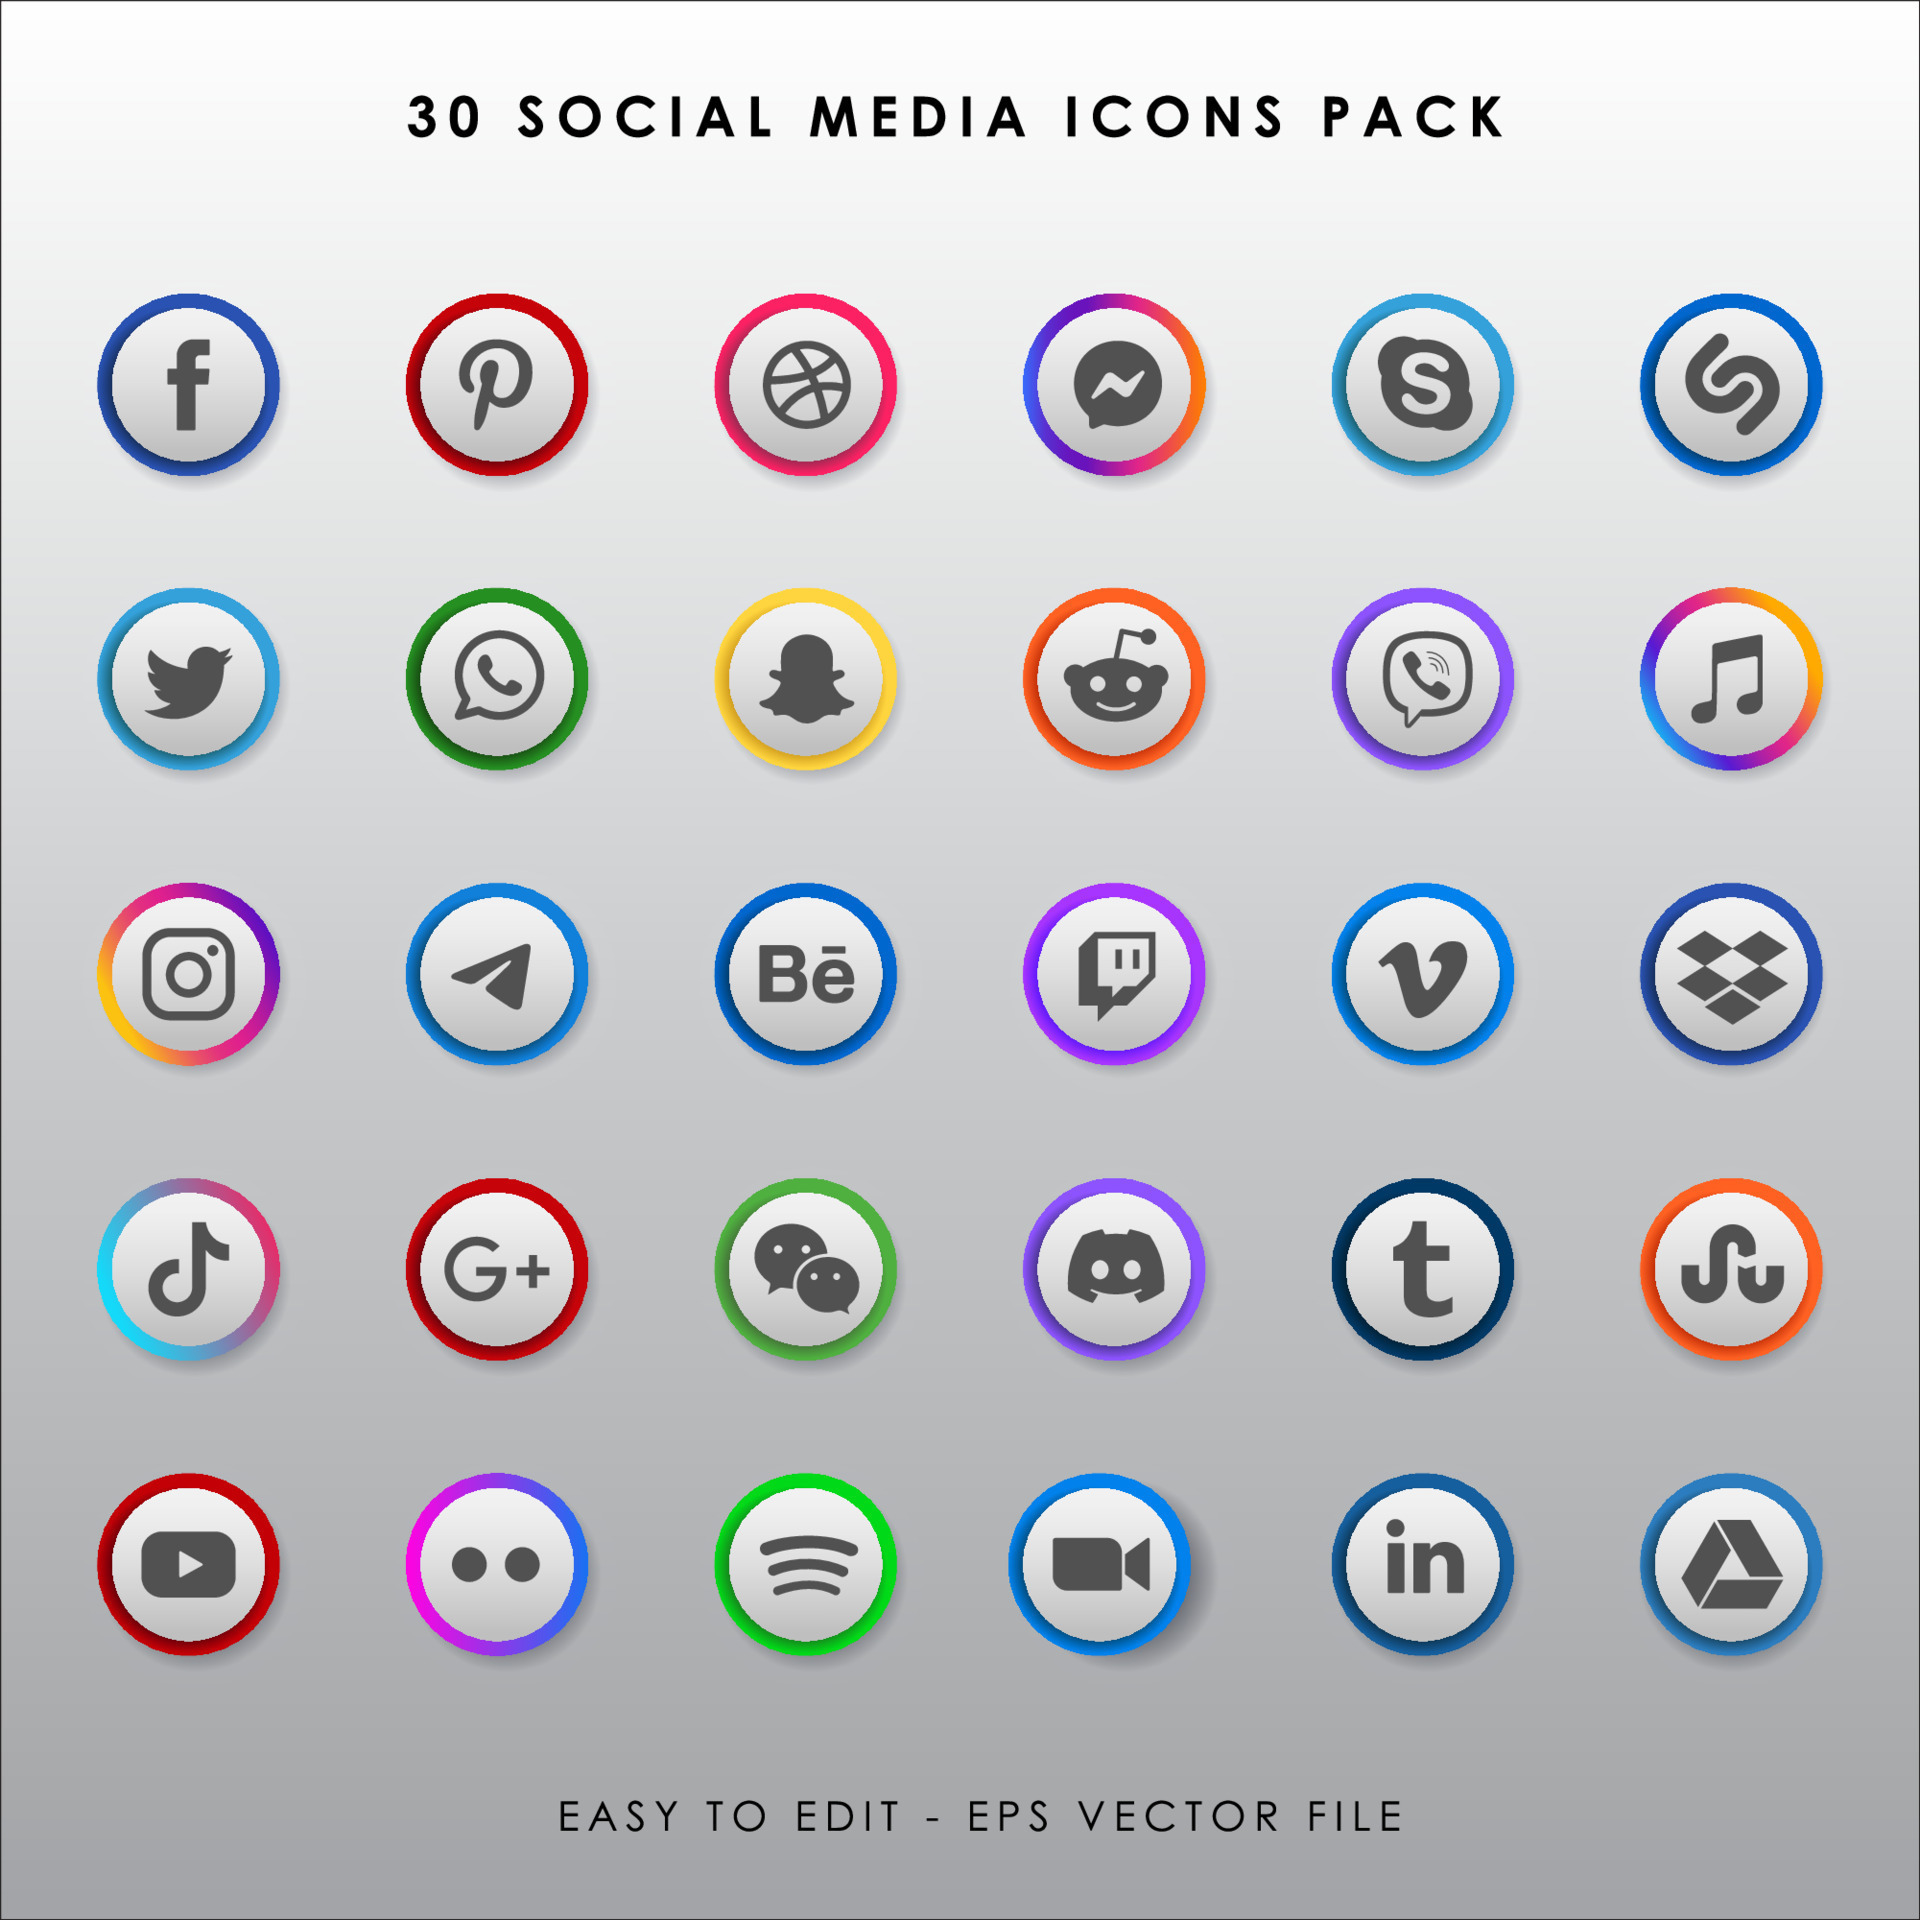 30 Sets of Free Twitter Icons to Download